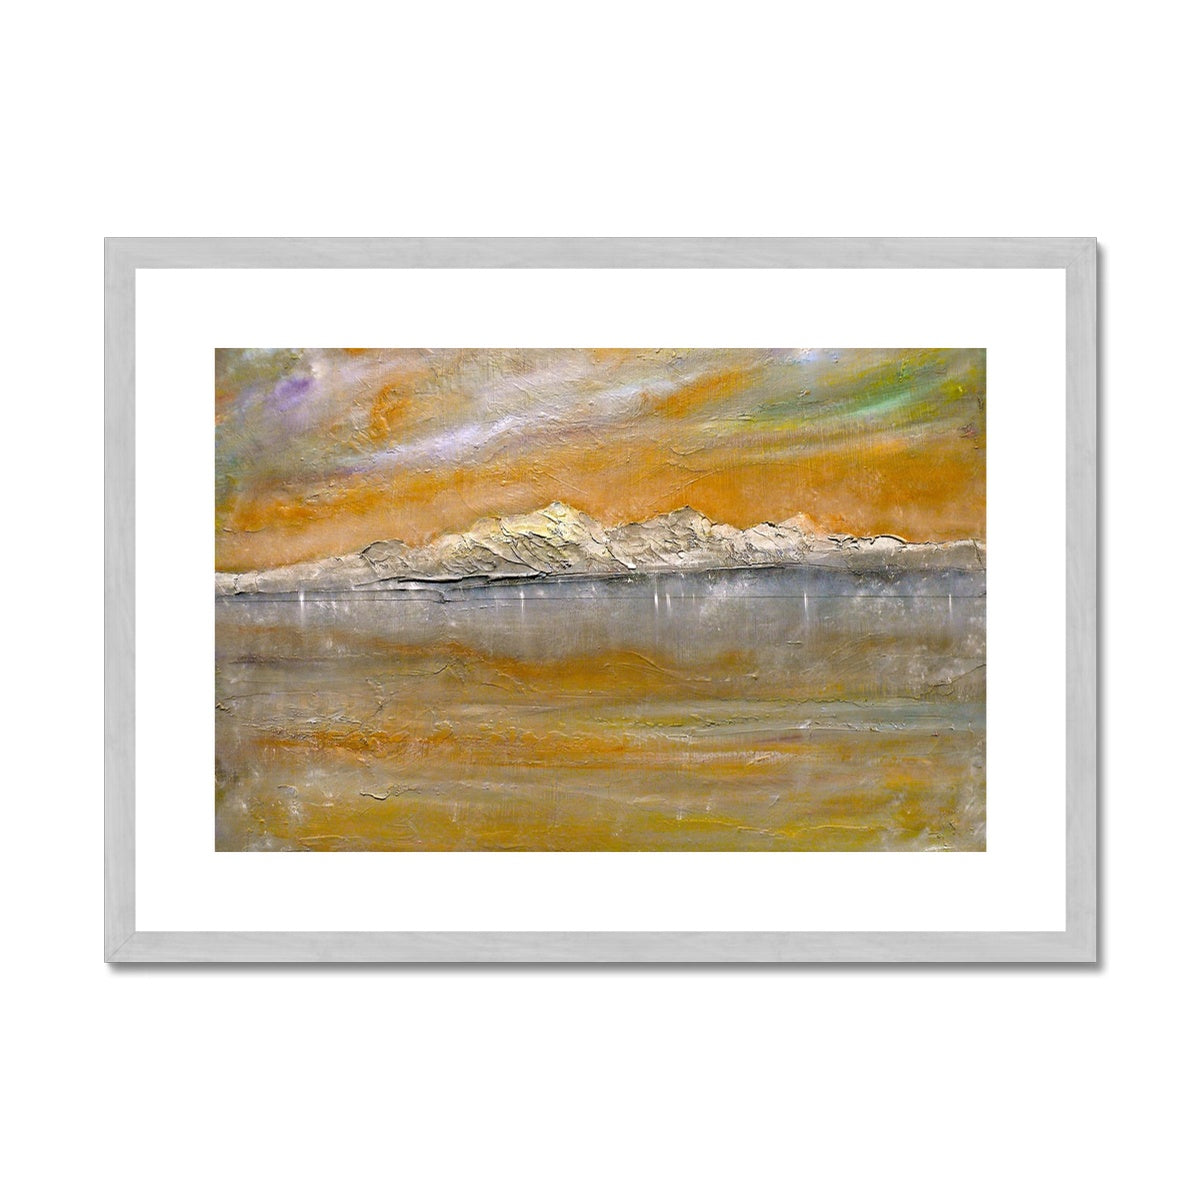 Arran Snow Painting | Antique Framed & Mounted Prints From Scotland-Antique Framed & Mounted Prints-Arran Art Gallery-A2 Landscape-Silver Frame-Paintings, Prints, Homeware, Art Gifts From Scotland By Scottish Artist Kevin Hunter